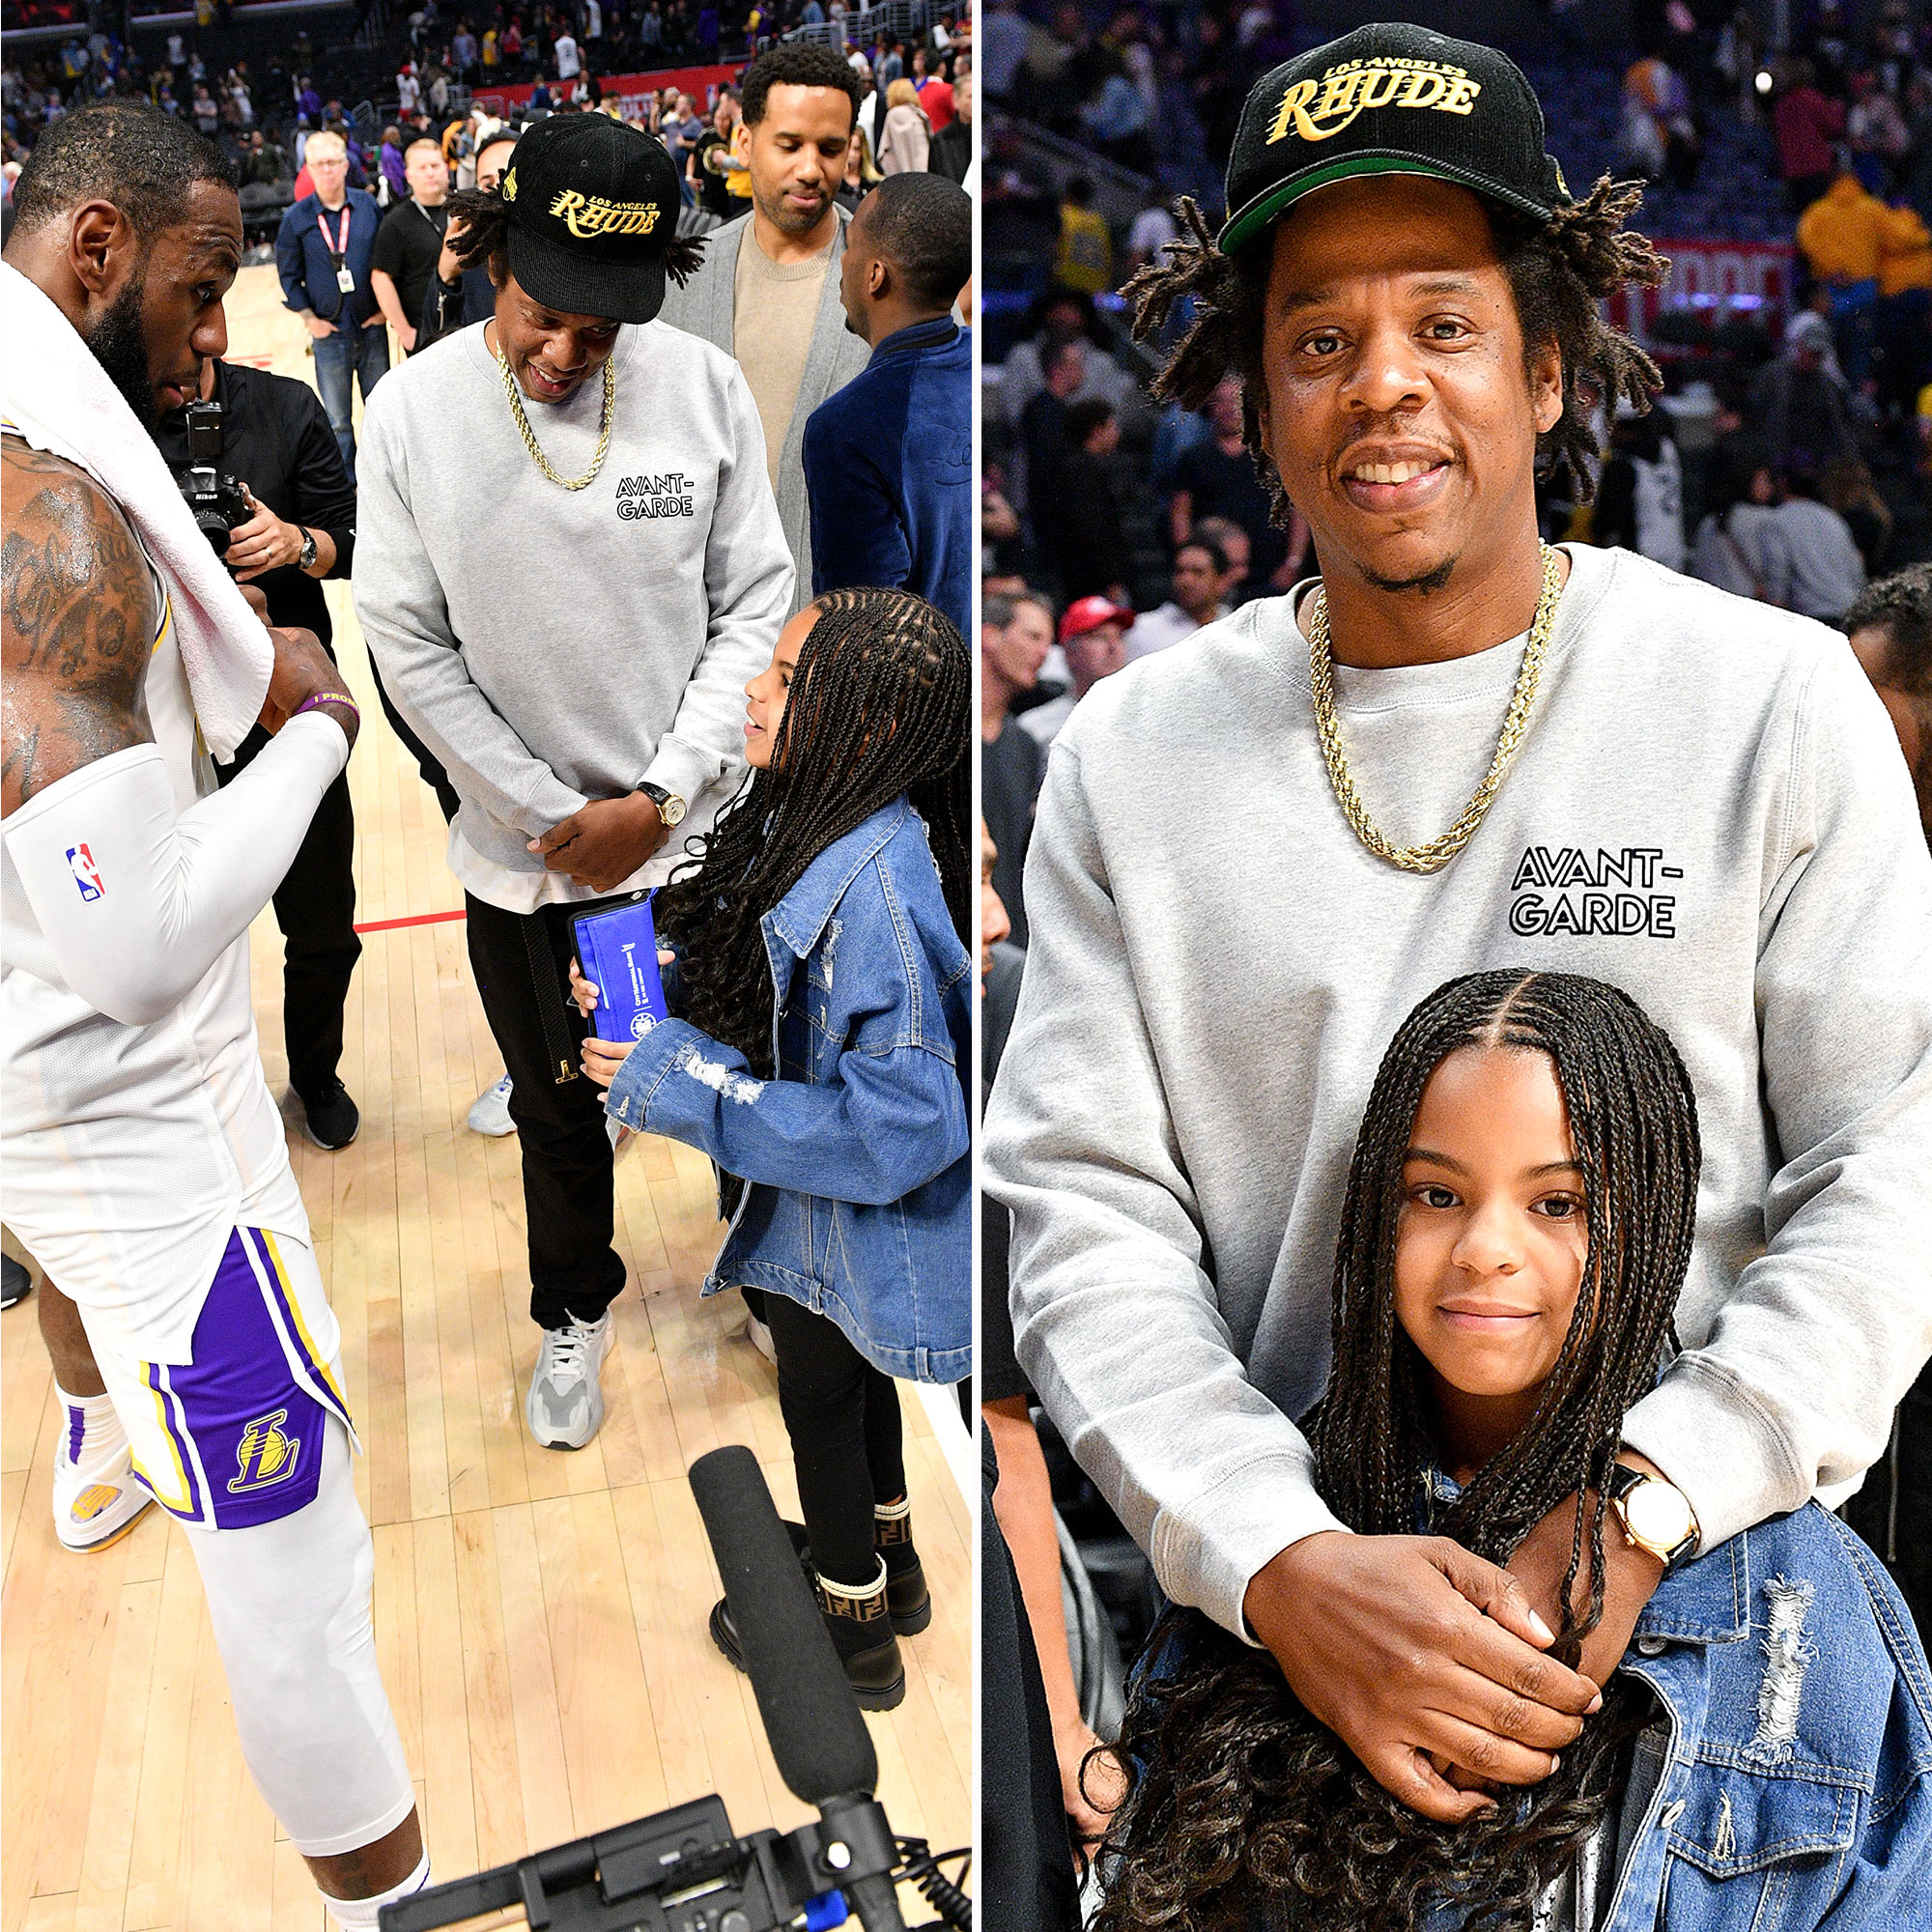 Blue Ivy Has Fun Attending NBA Game With Dad Jay-Z: Pics